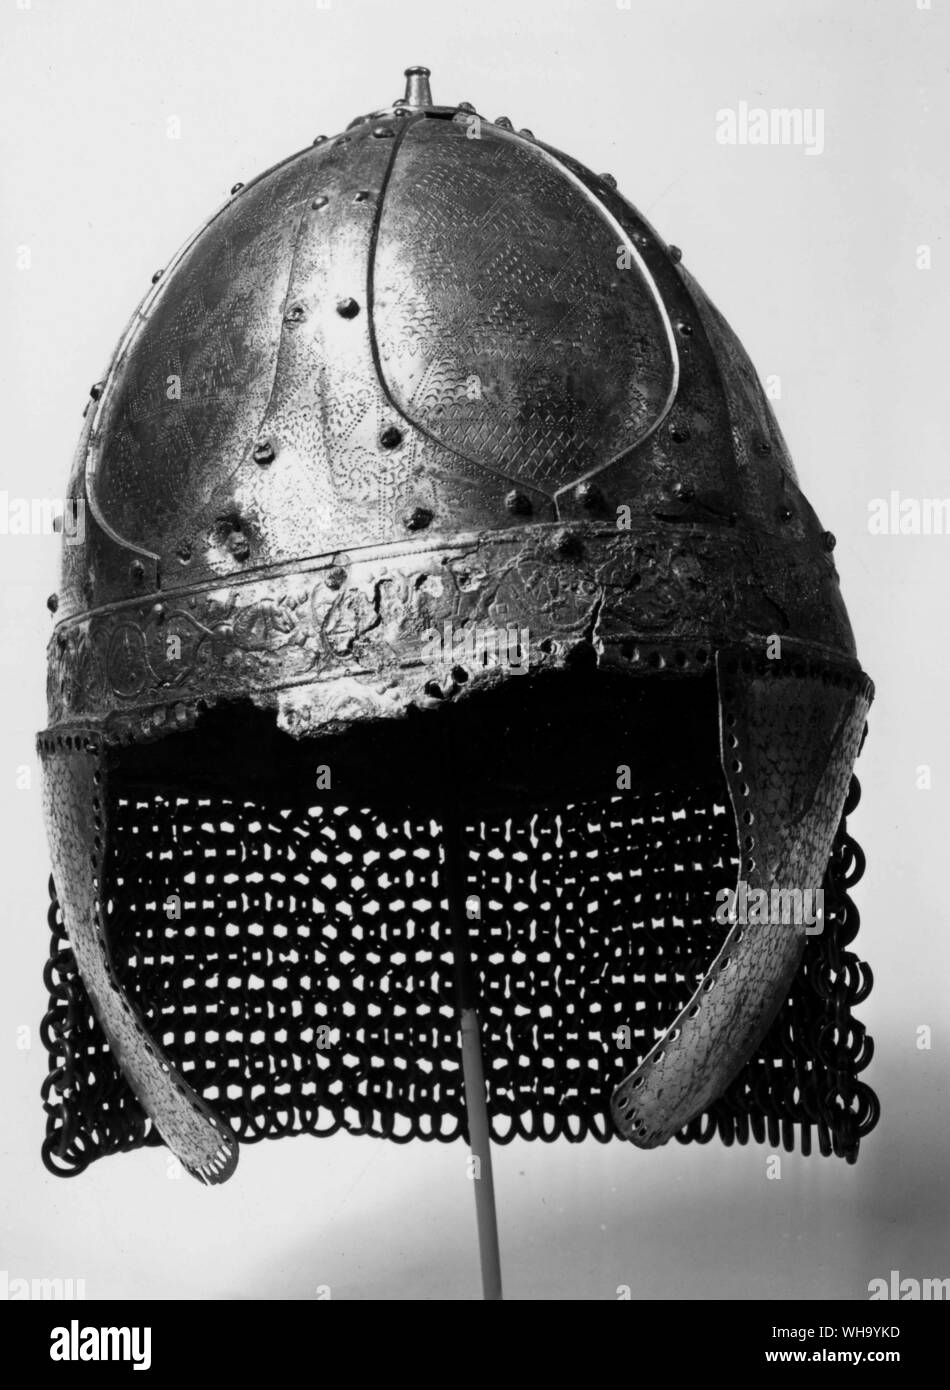 Helmet with chain mail; possibly German in origin. Stock Photo